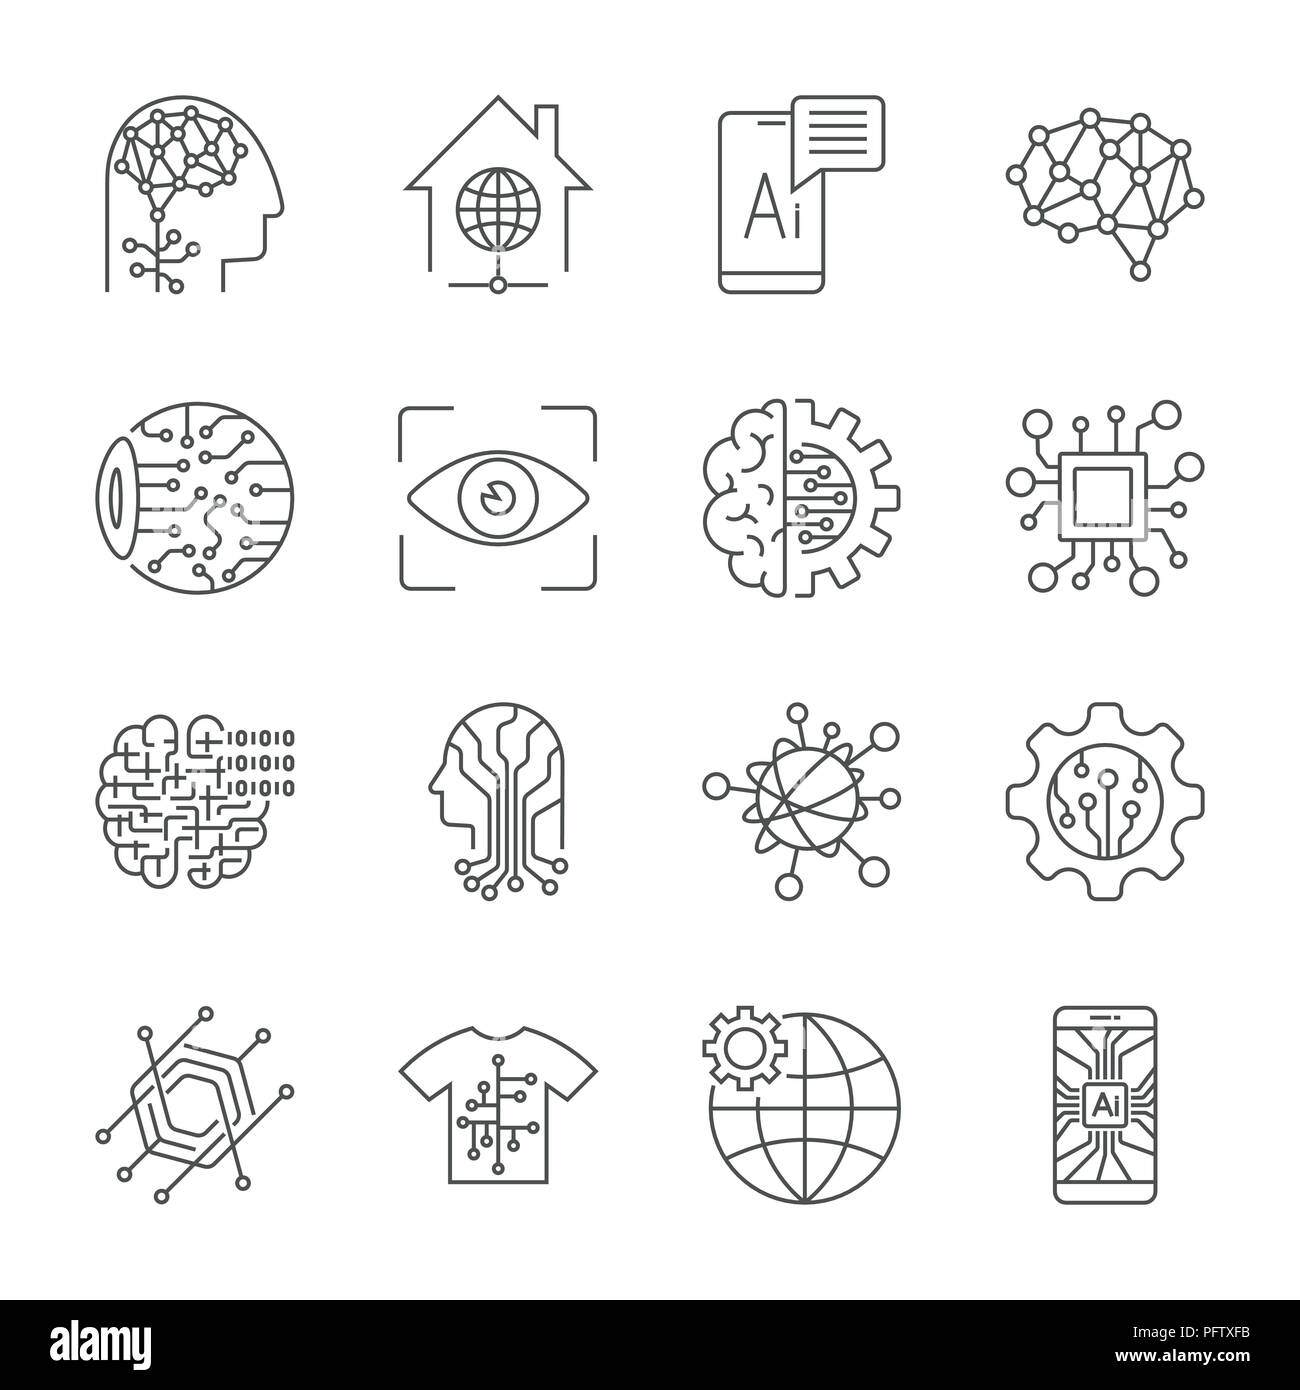 Industry 4.0, Artificial Intelligence and Internet of Things icons set. Digitalization concept enterprise IoT, smart factory, industry 4.0, AI - vector illustration Stock Vector